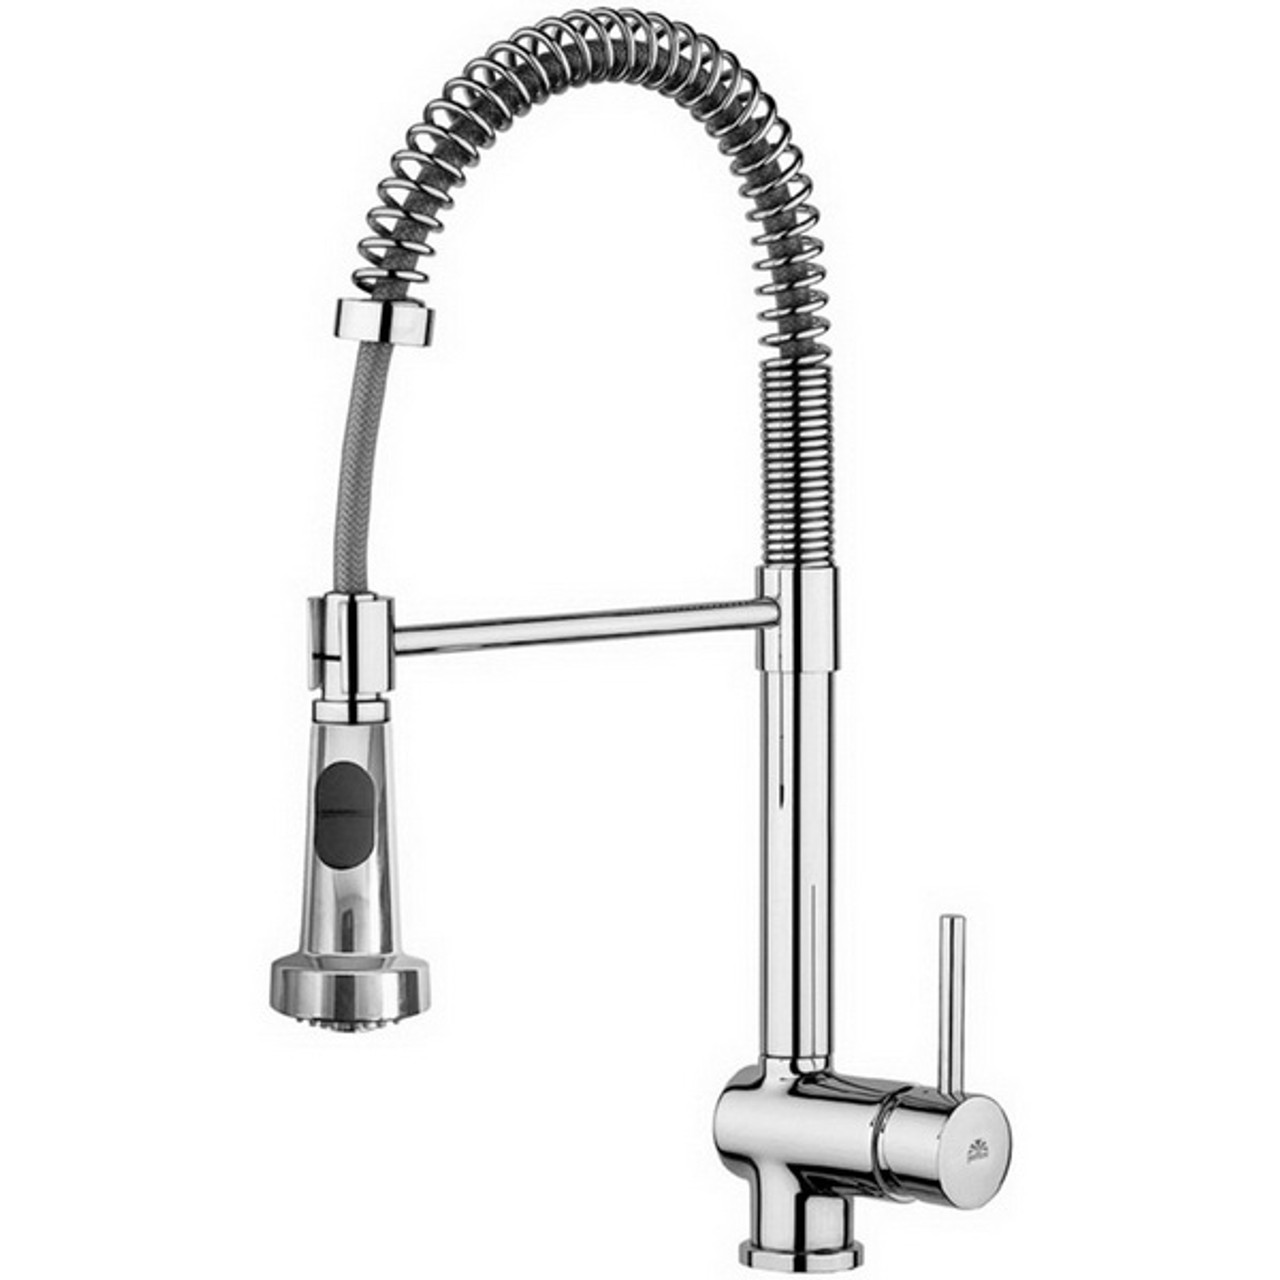 STICK KITCHEN SINK MIXER 1 HOLE WITH SWIVEL SPOUT & 2 STAINLESS 